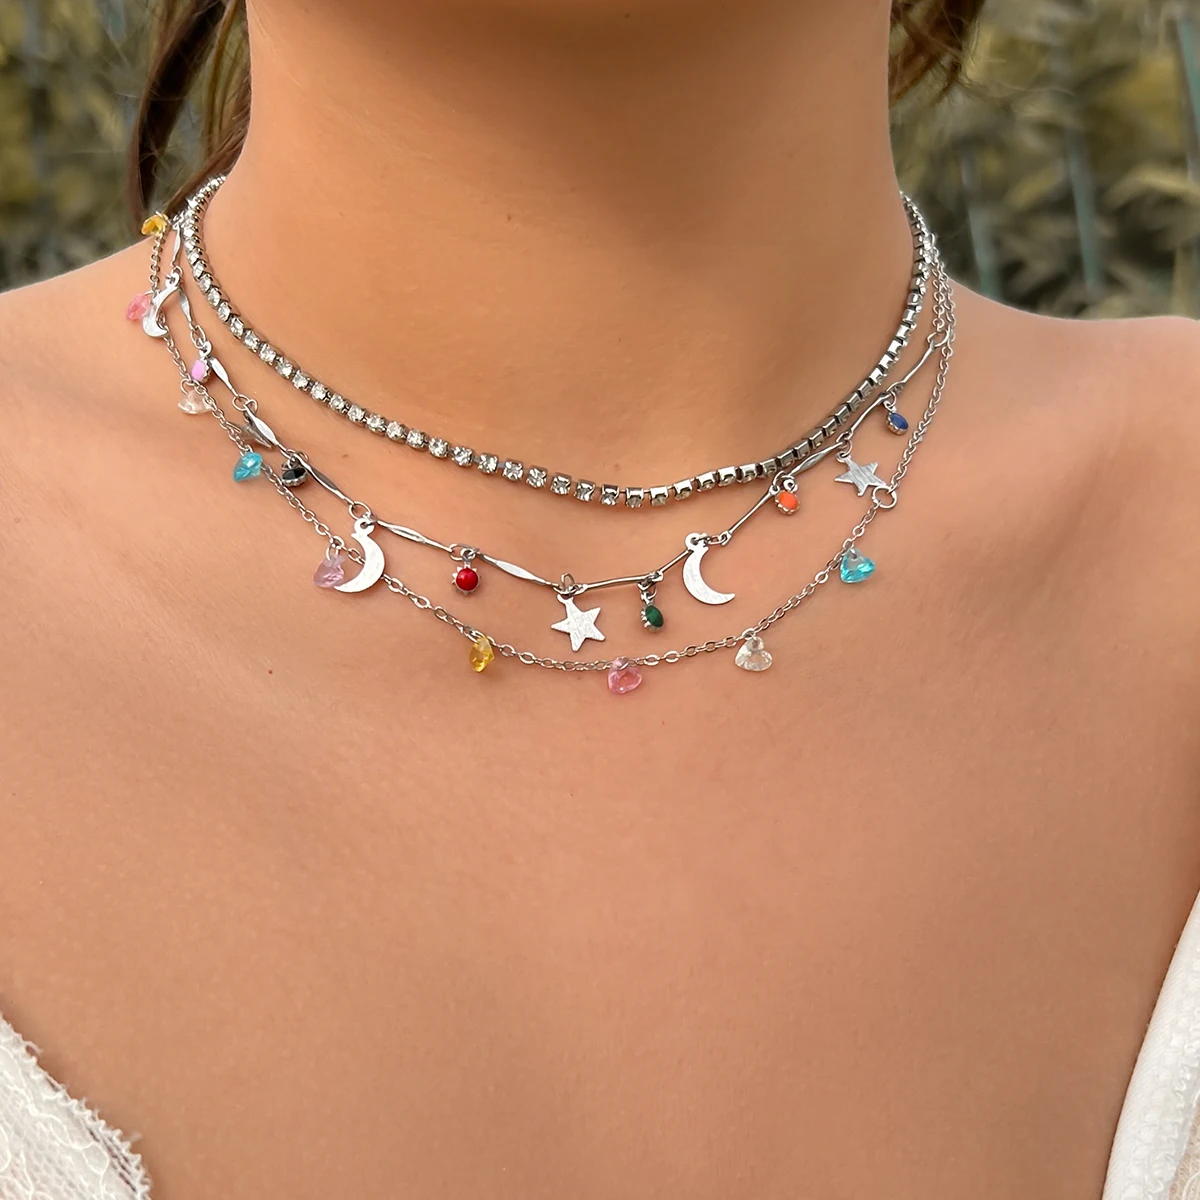 

PuRui Multilayer Star Moon With Crystal Beads Charm Women Necklace Rhinestone Short Choker Jewelry Collar Wedding Friends Gifts